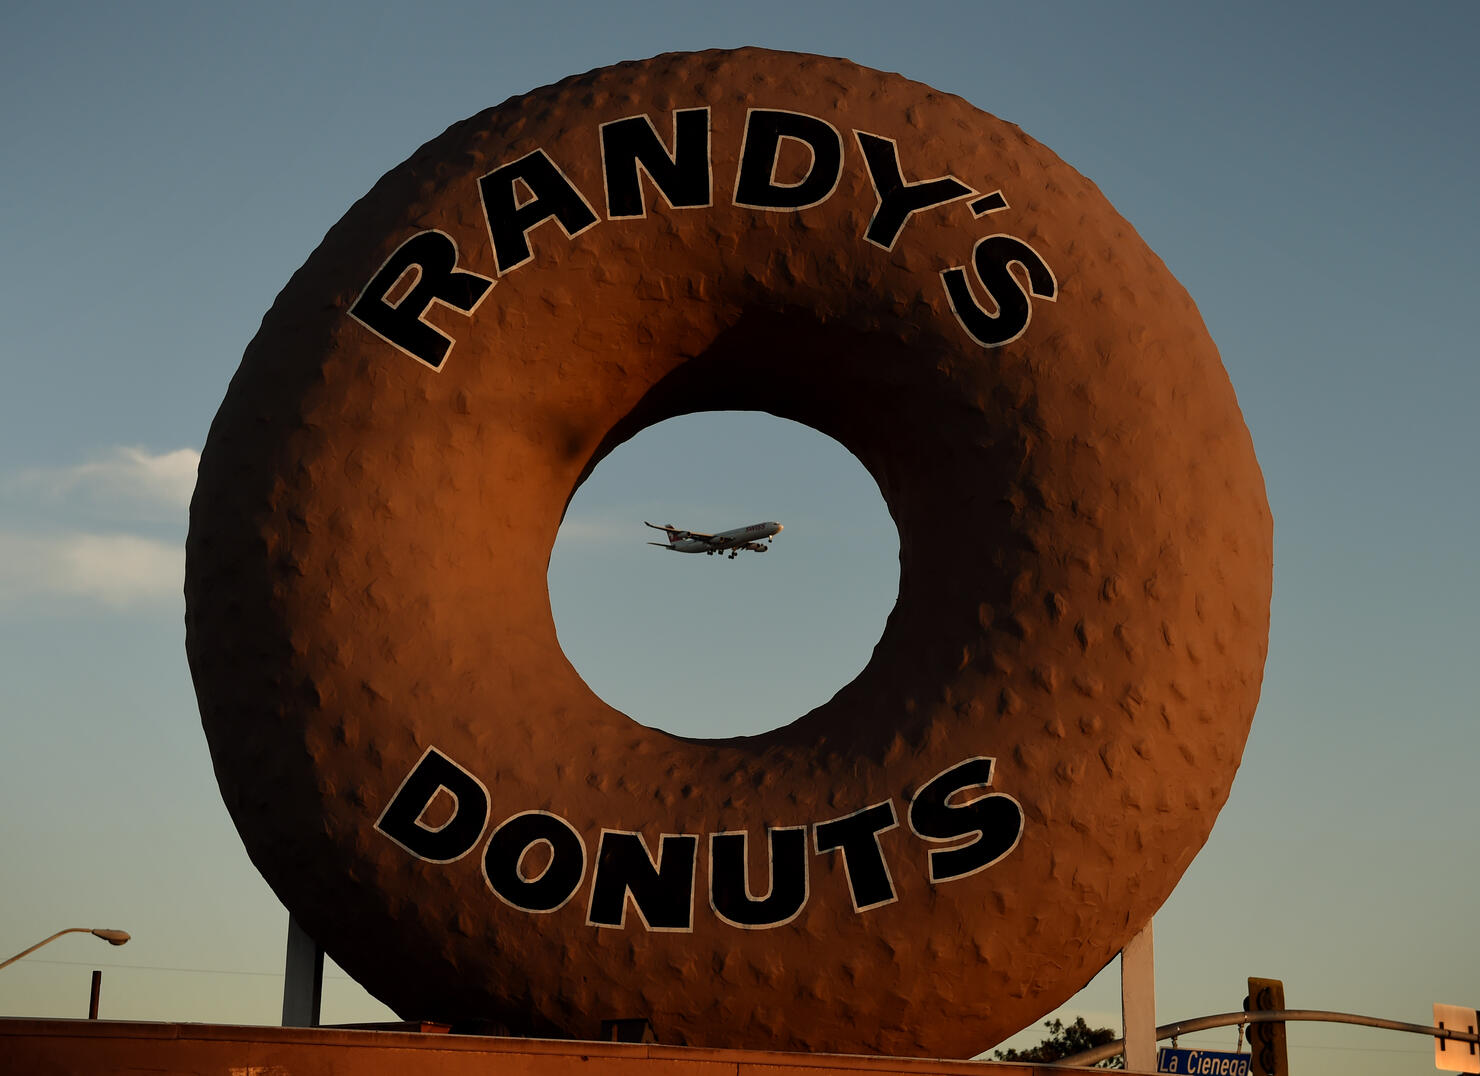 Randy's Donut's iconic sign gets makeover for Super Bowl